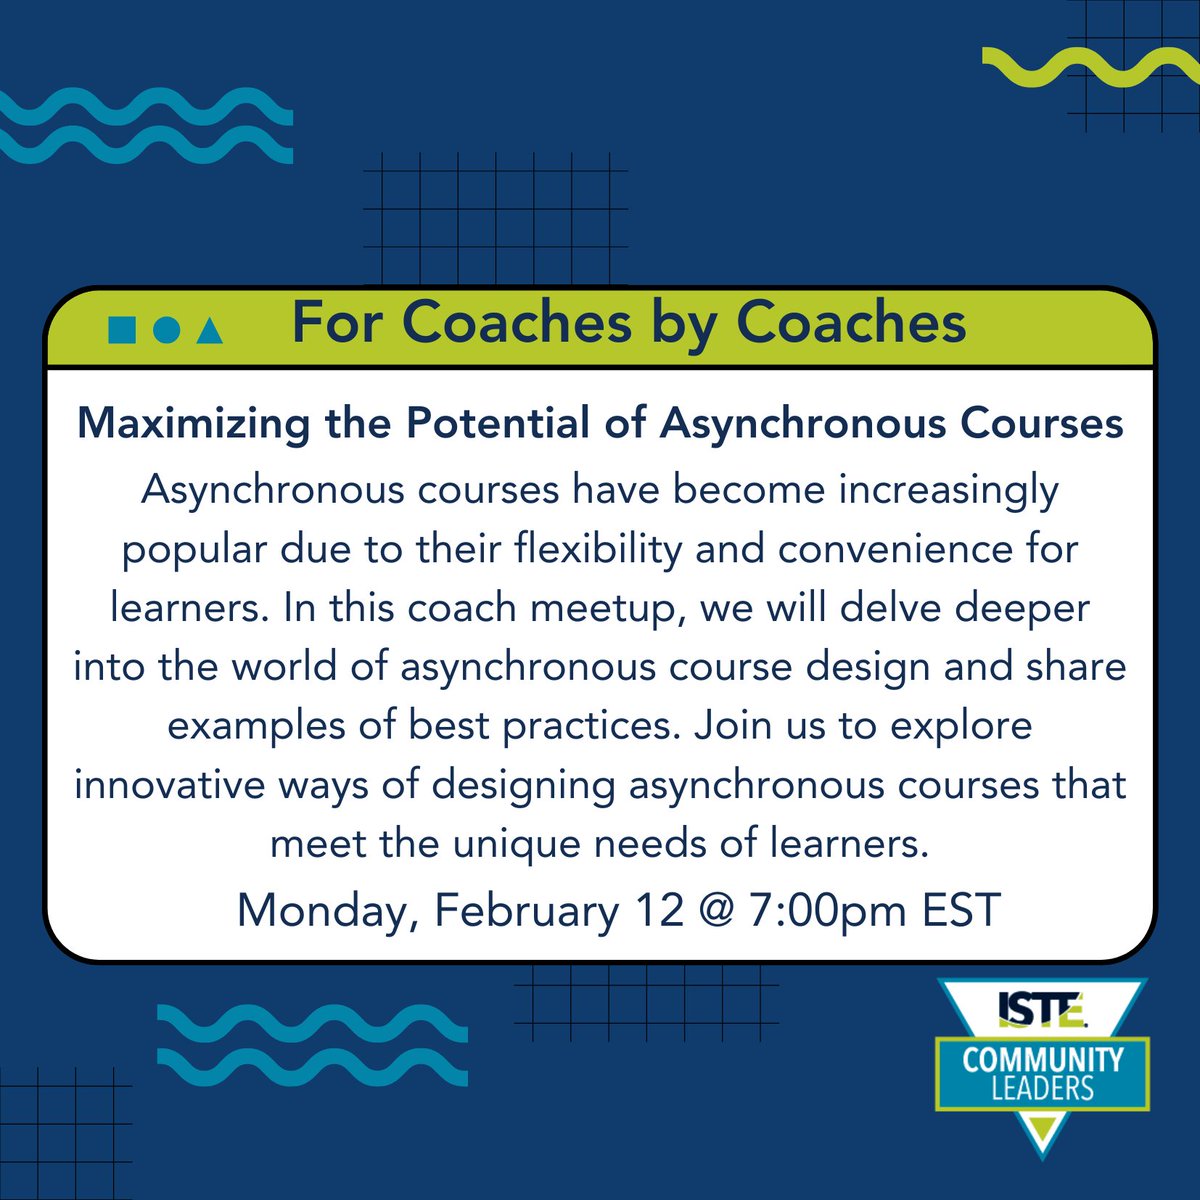 Join @ISTECommunity Leaders for the #Coaches meetup on Monday, Feb 12 at 7pm EST to explore the idea of maximizing asynchronous courses hosted by @HVTechCoach!! 📷 Register here: bit.ly/ISTECoachFEBme… #ForCoachesByCoaches